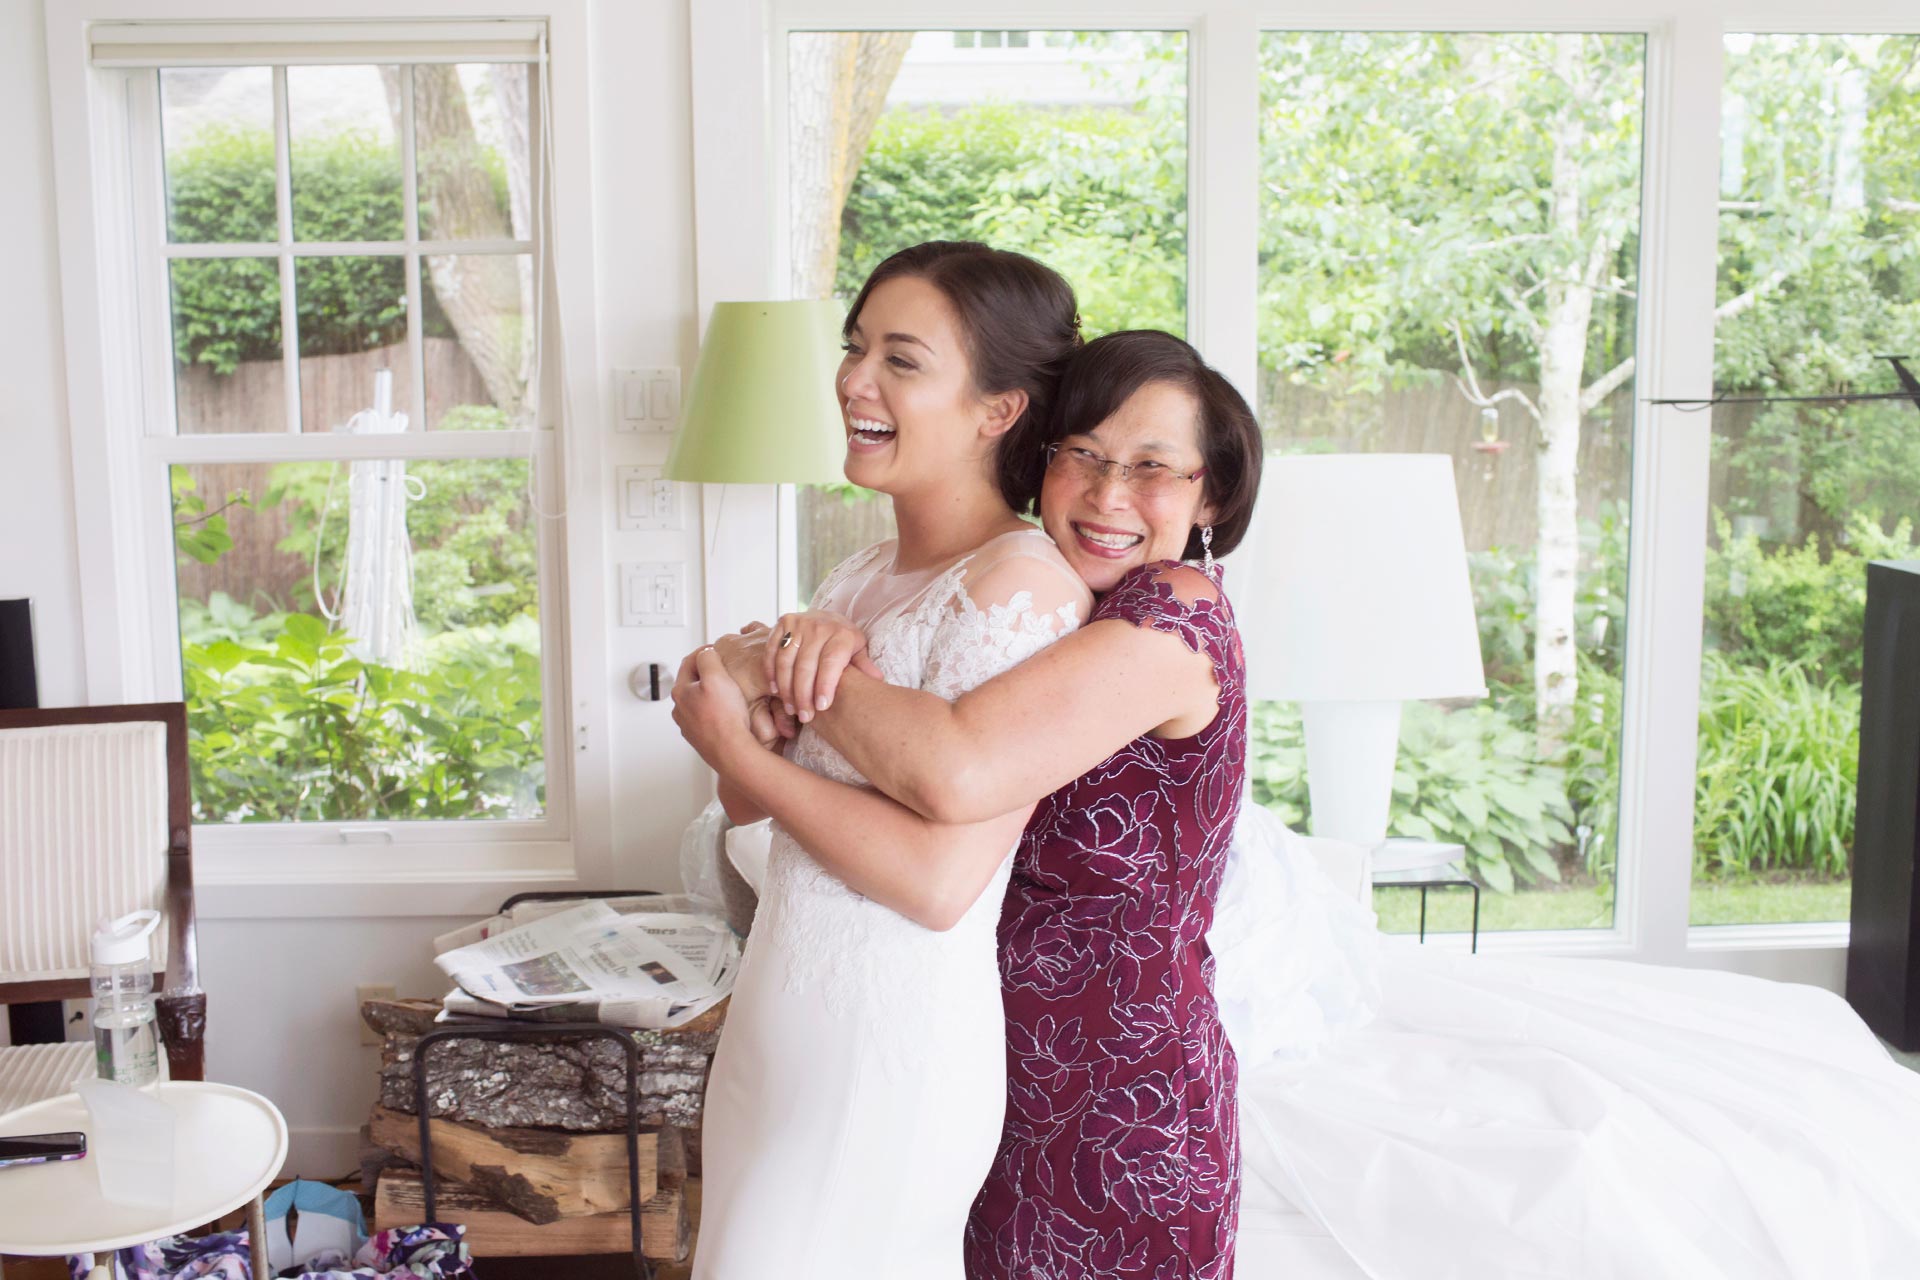 A bride's mom gives her a big hug after she puts her wedding dress on.